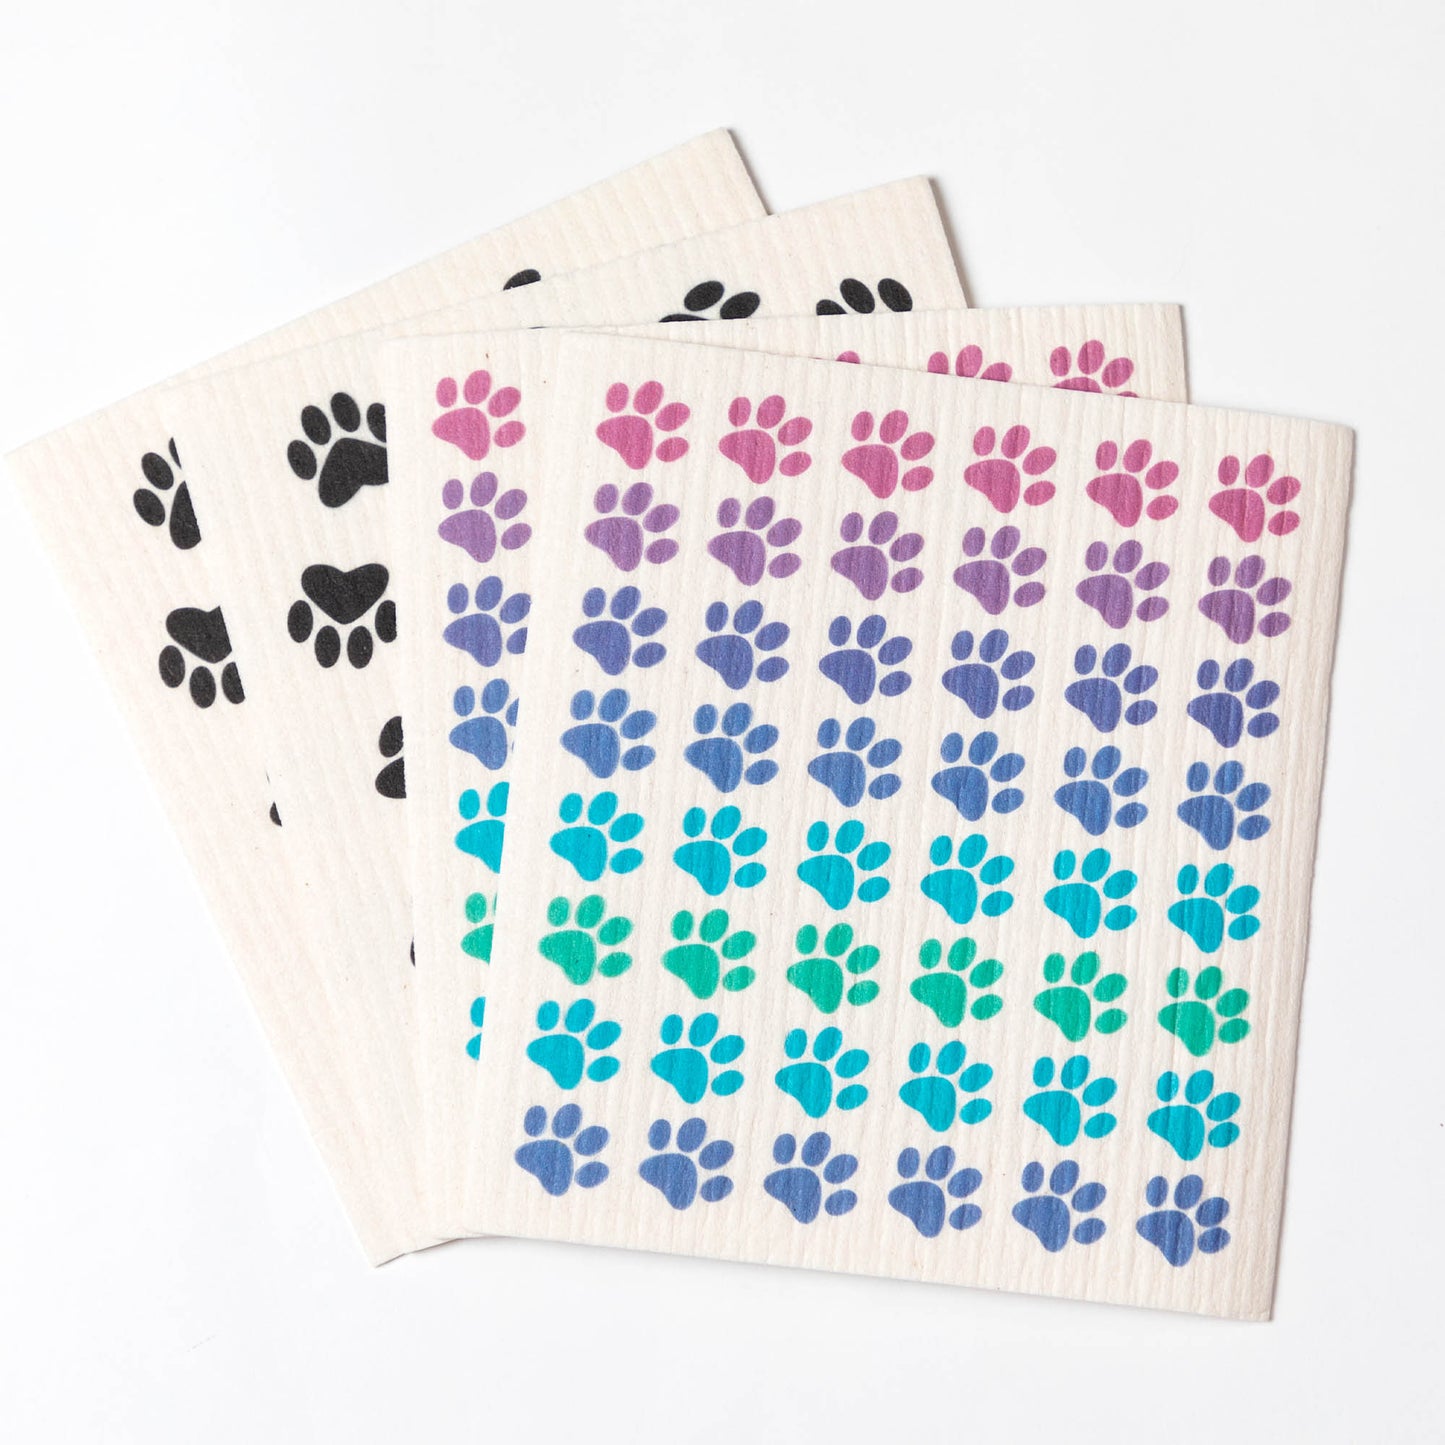 All Over Paws Biodegradable Dishcloth - Set of 4